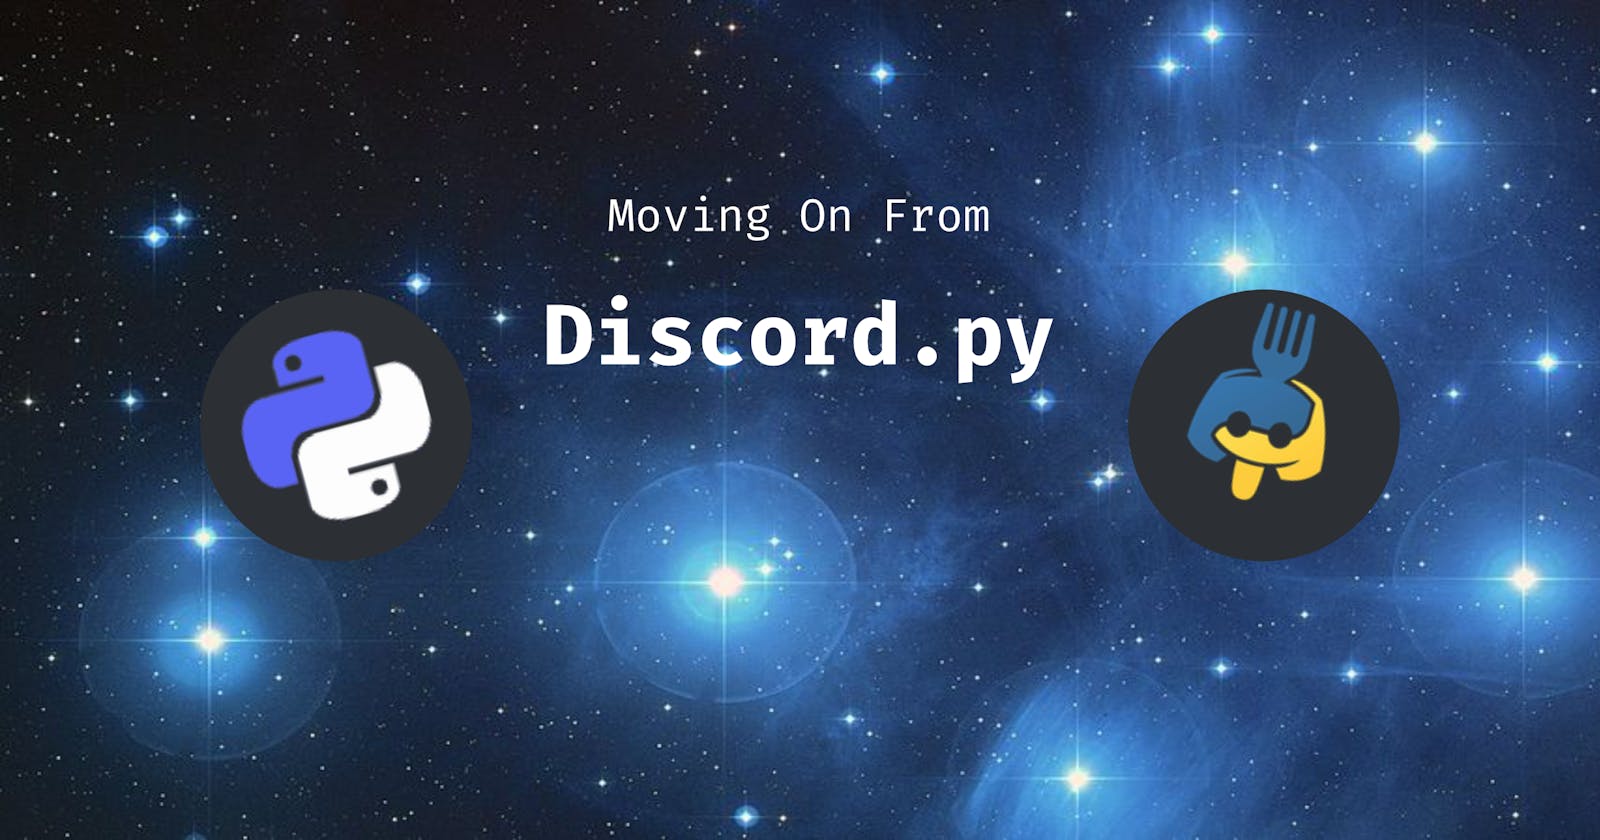 Moving On From Discord.py